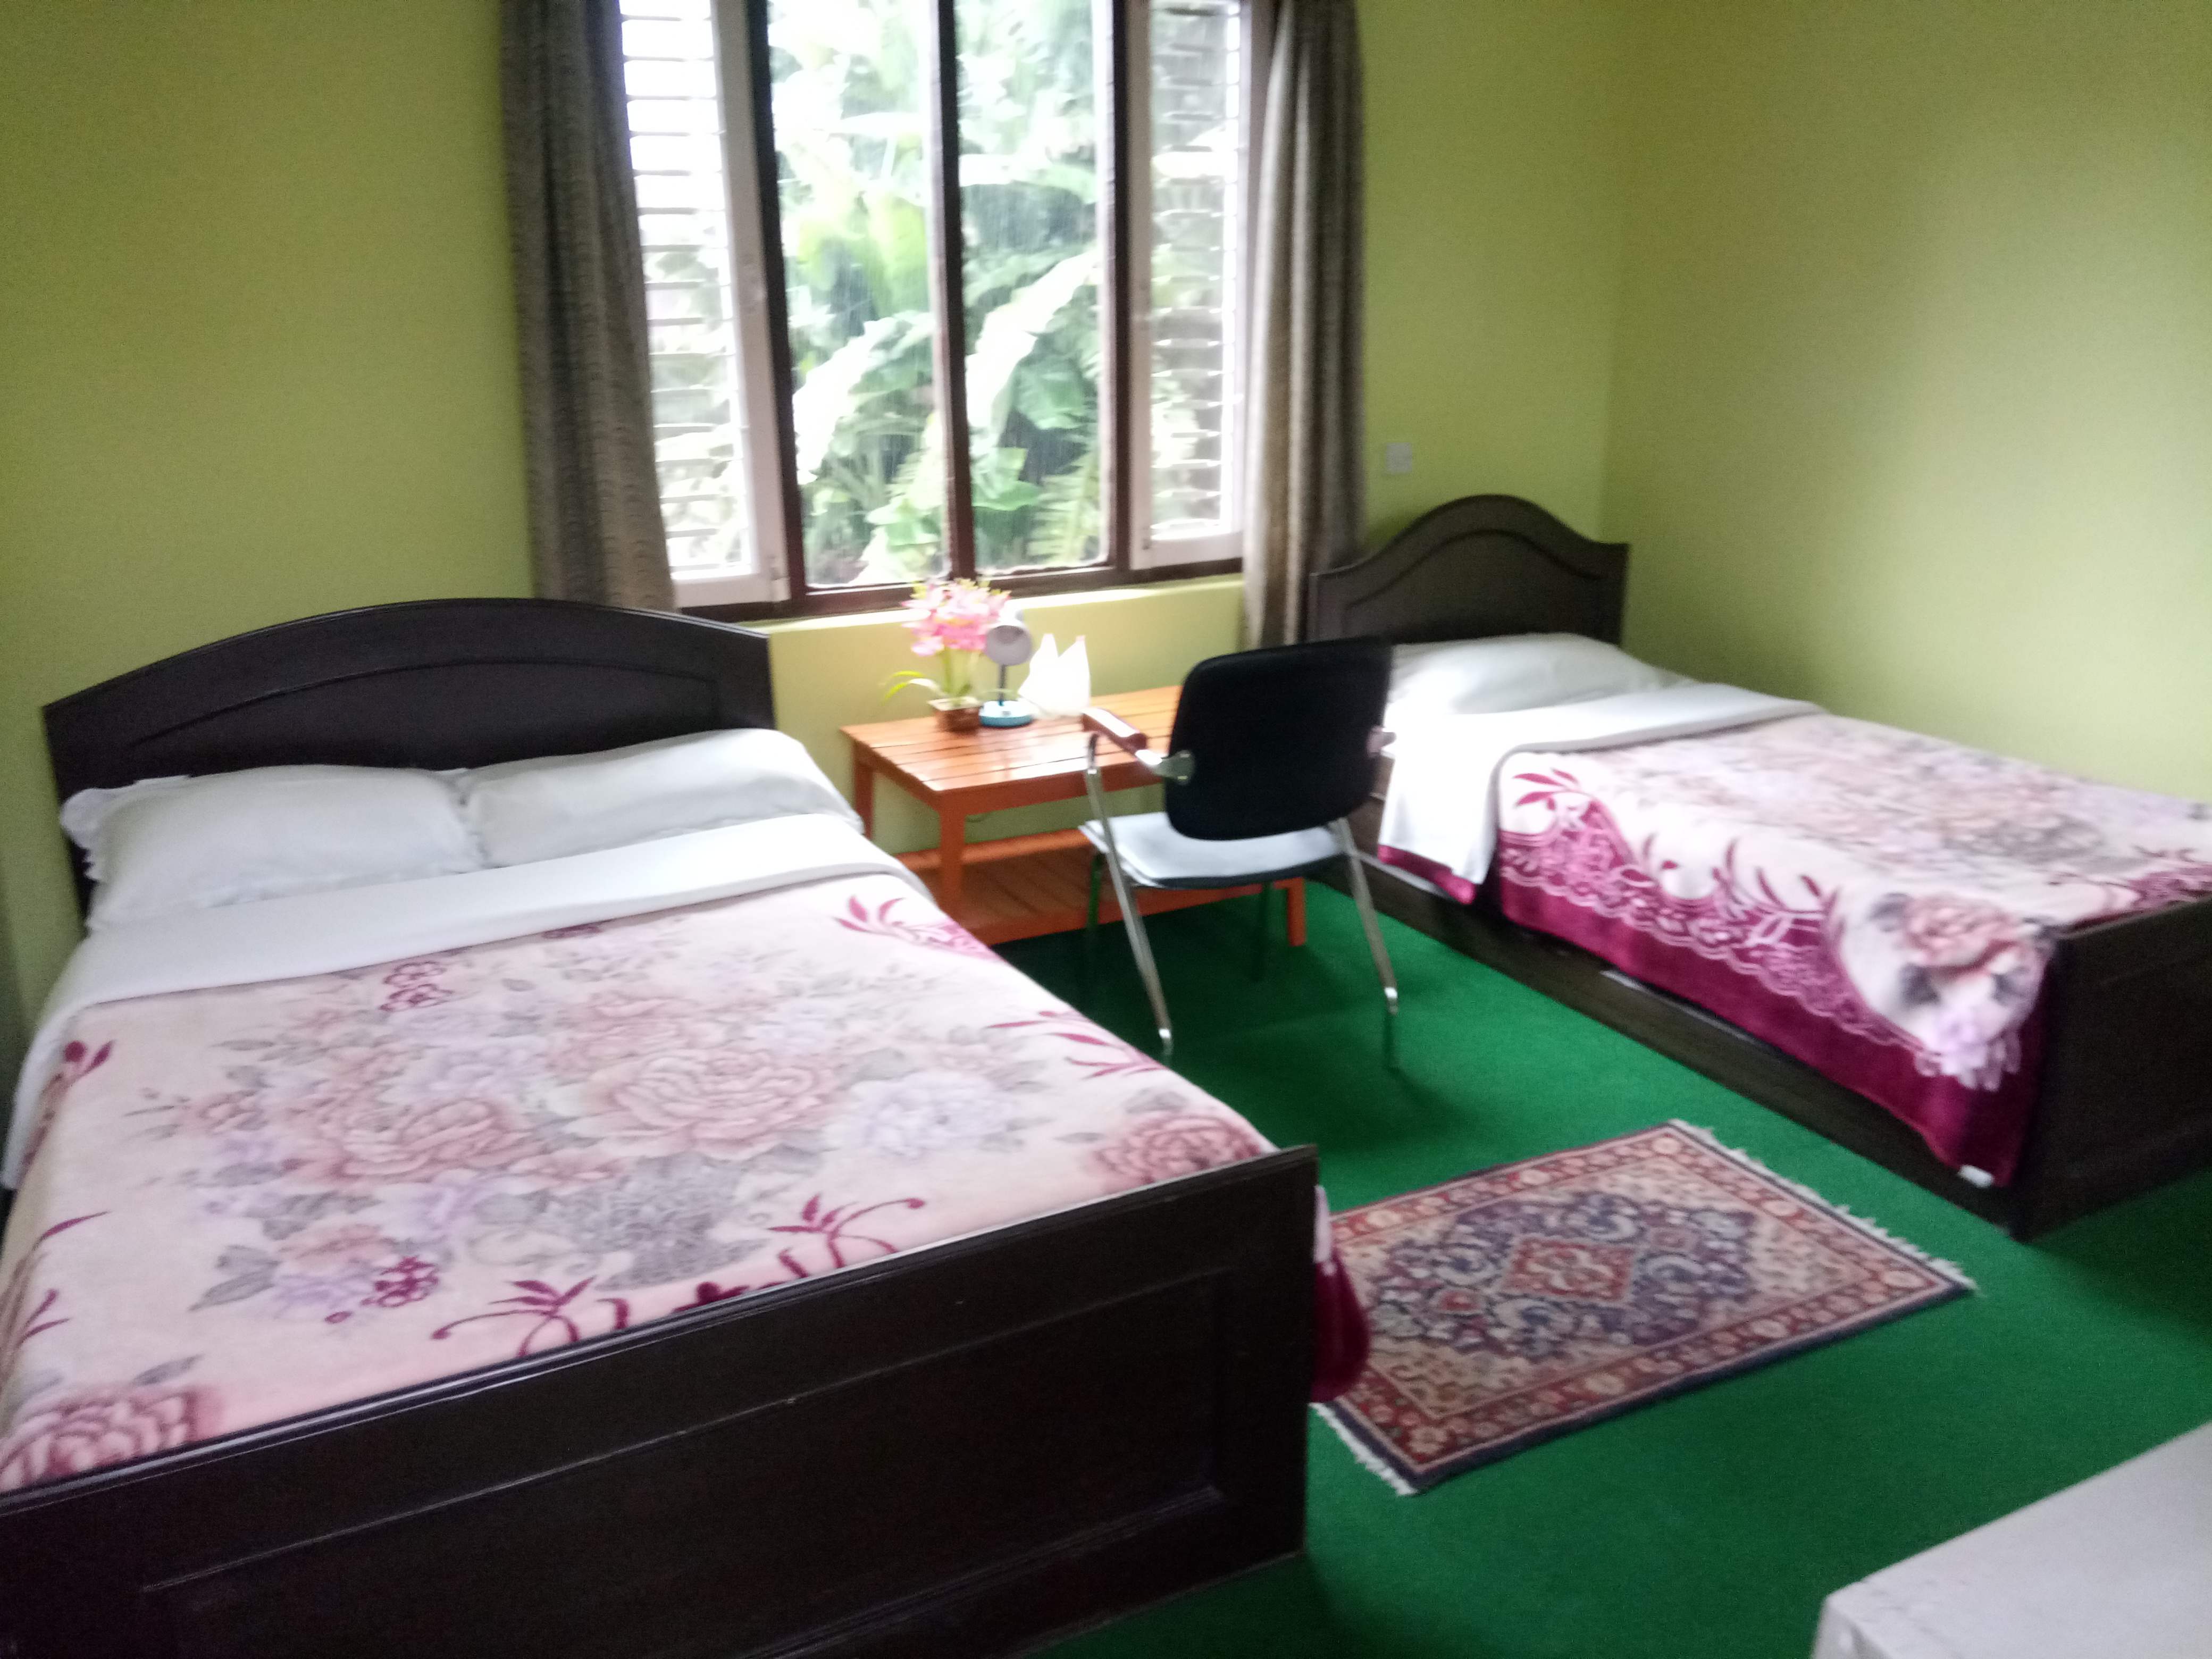 Photo of a Standard Single, Double and Twin Room of a Hotel in Lakeside Pokhara Nepal. New Pokhara Lodge